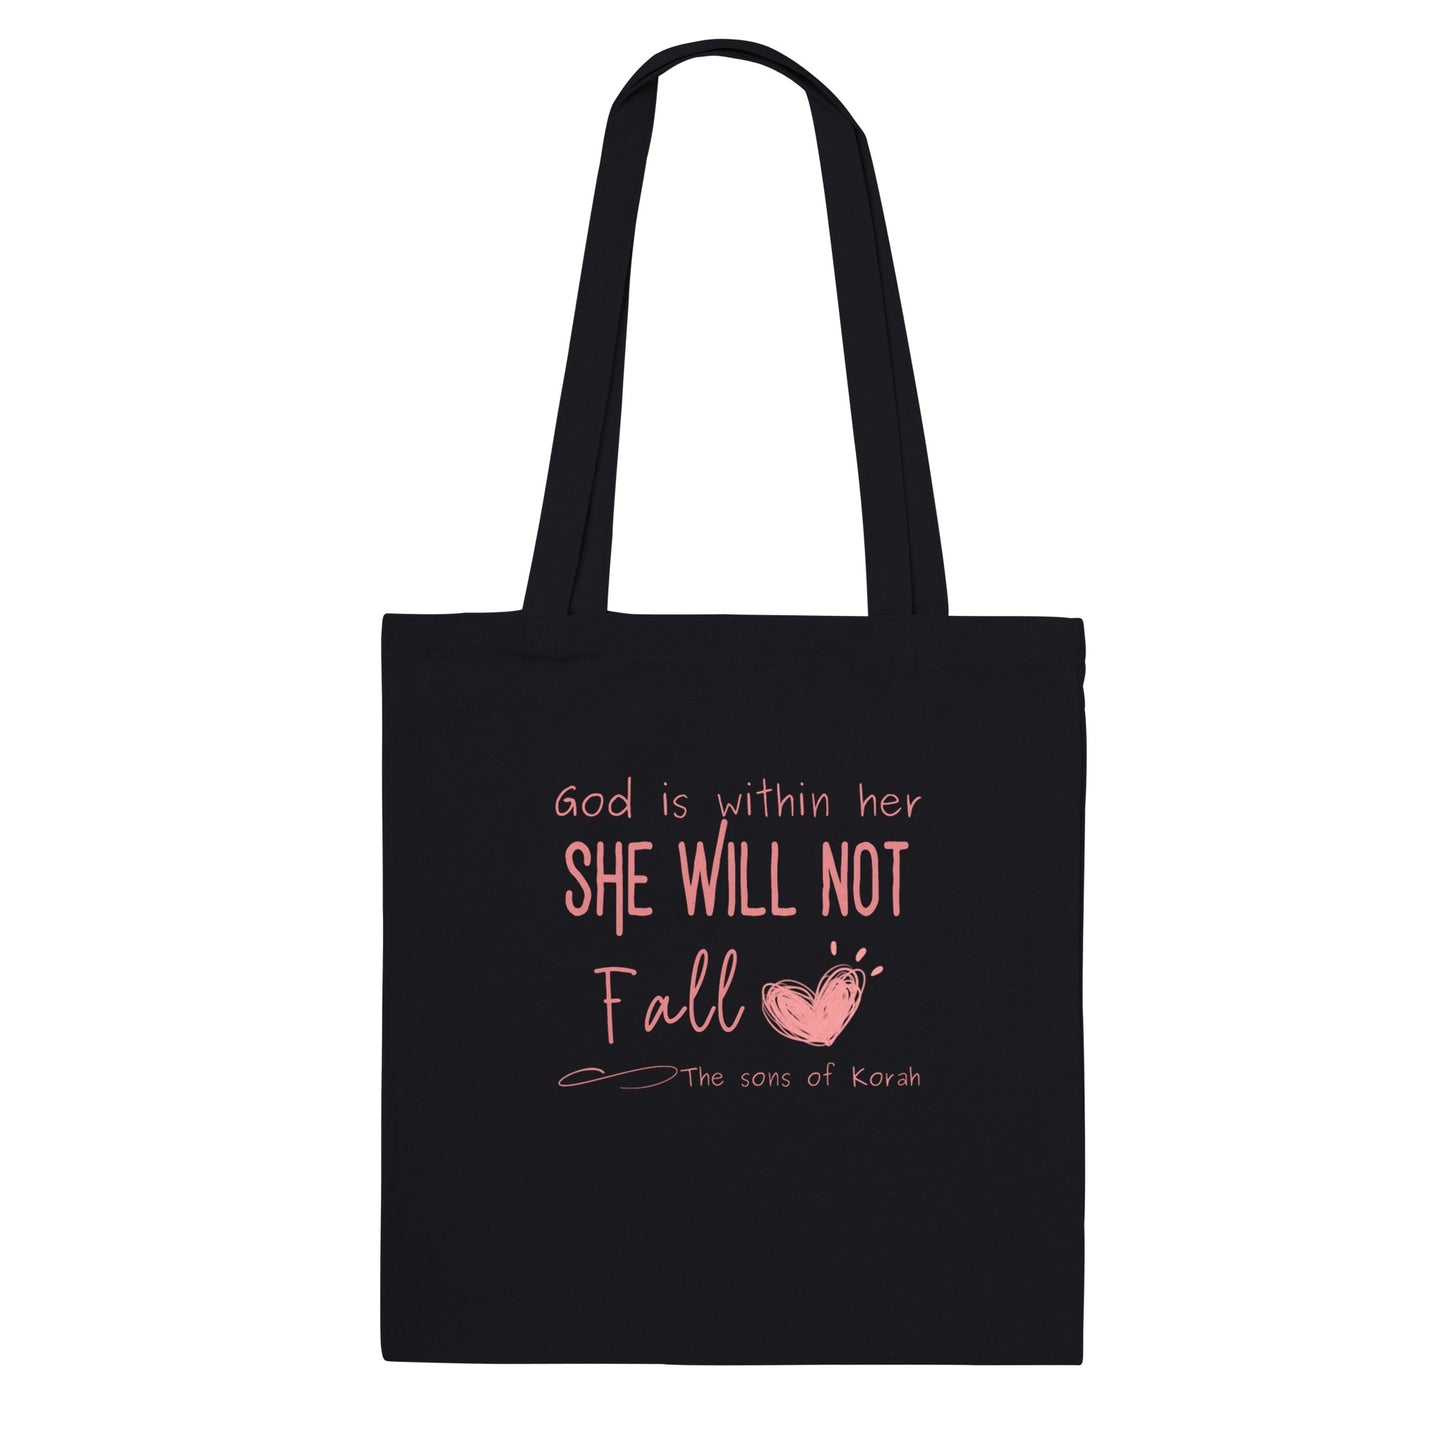 God is within her, she will not fall - Premium Tote Bag